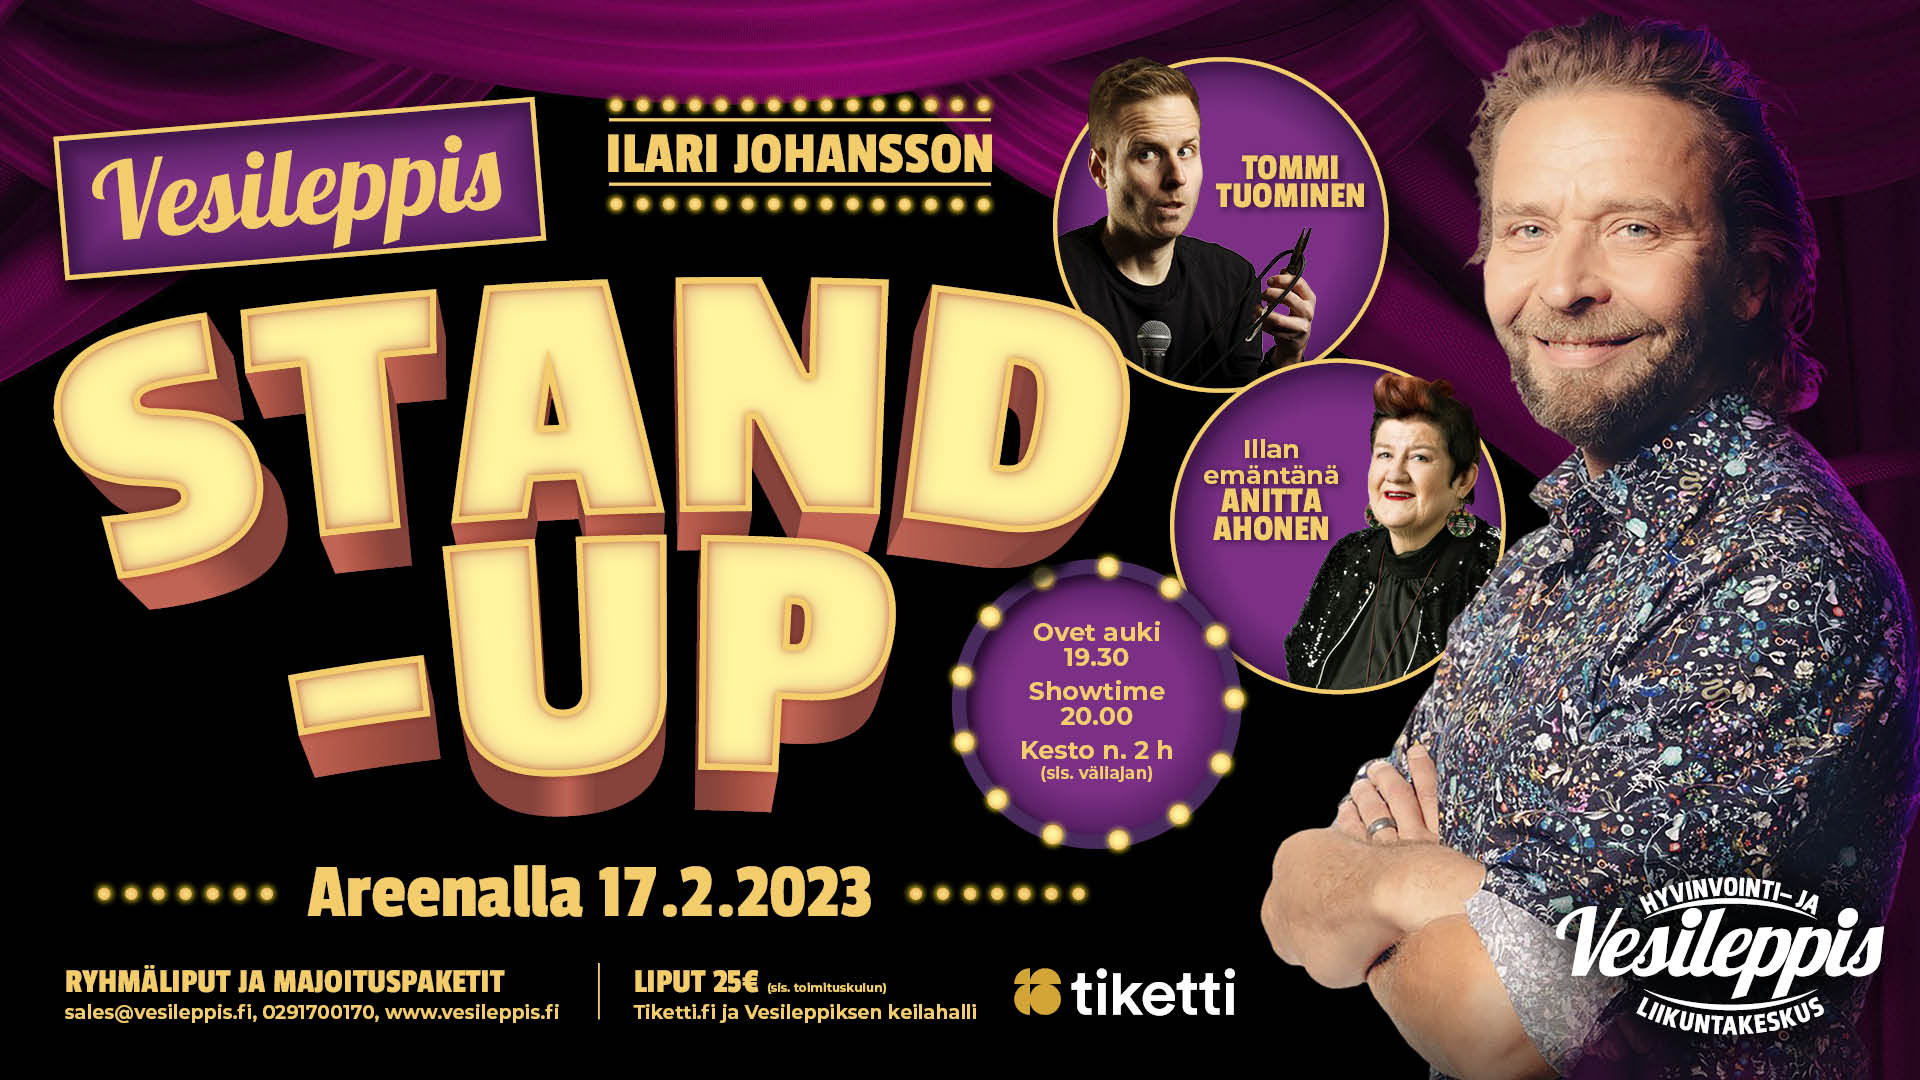 Vesileppis Stand-up